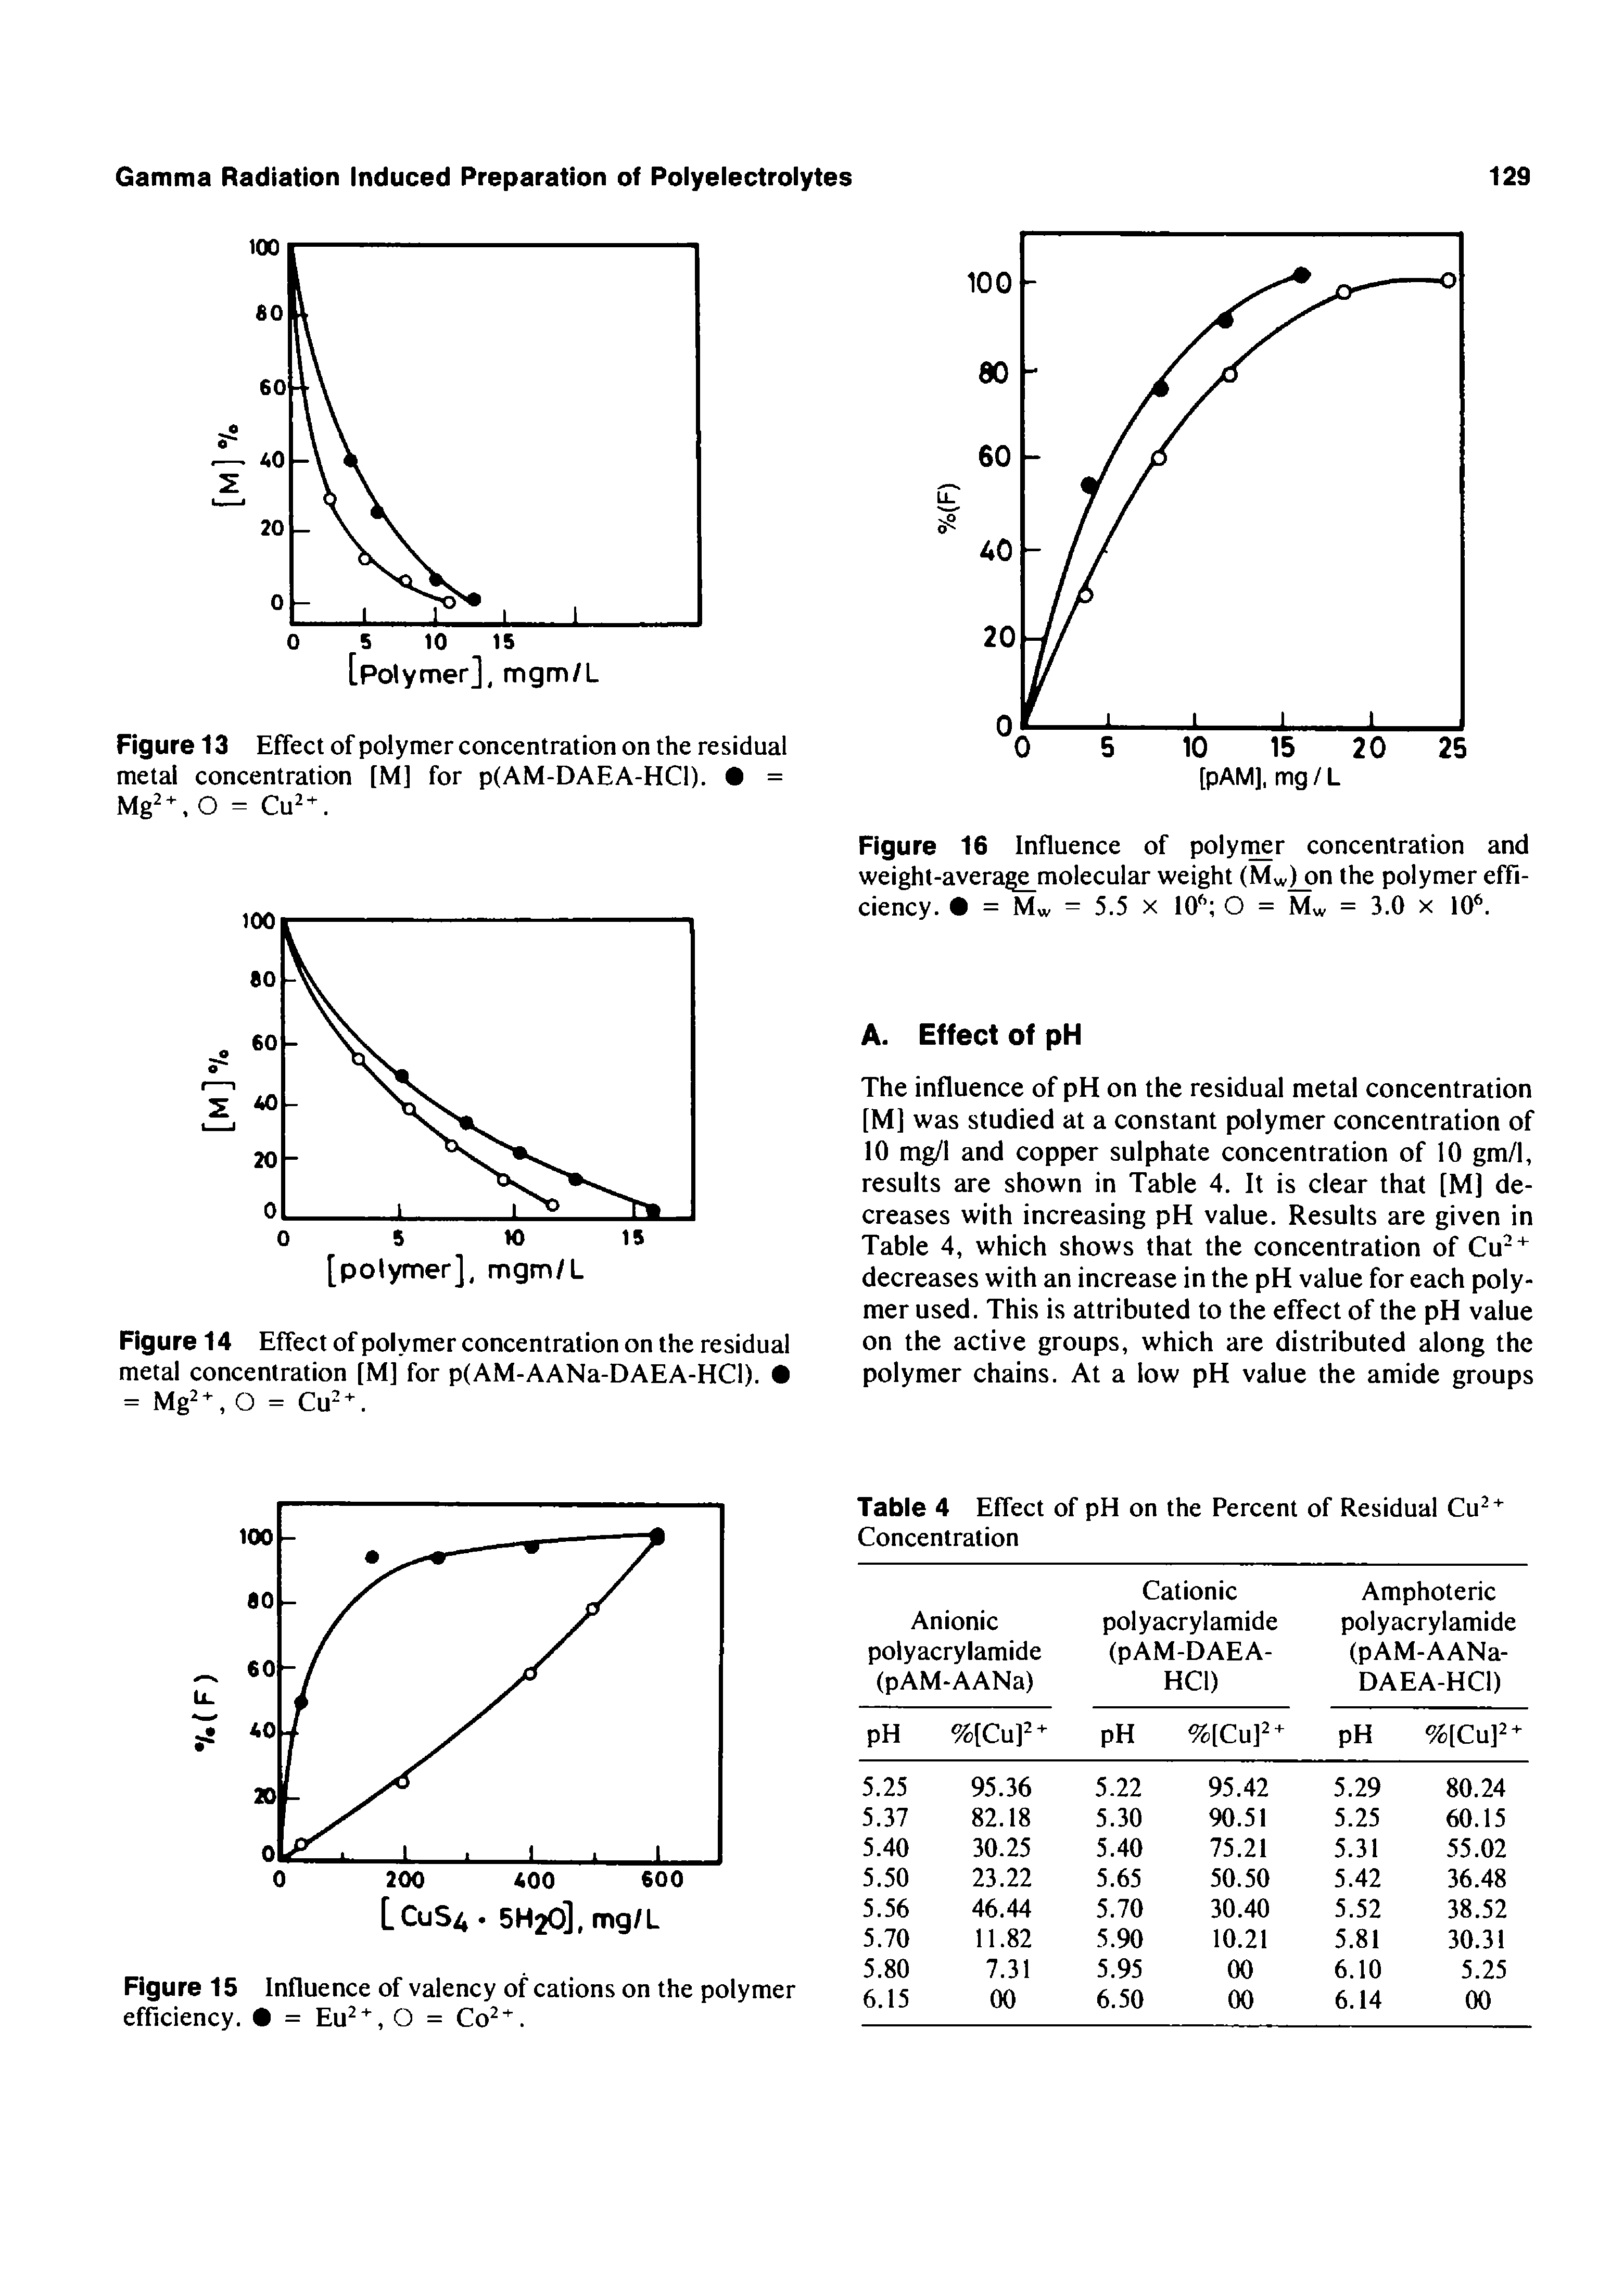 Figure 15 Influence of valency of cations on the polymer efficiency. = Eu, O = Co "".